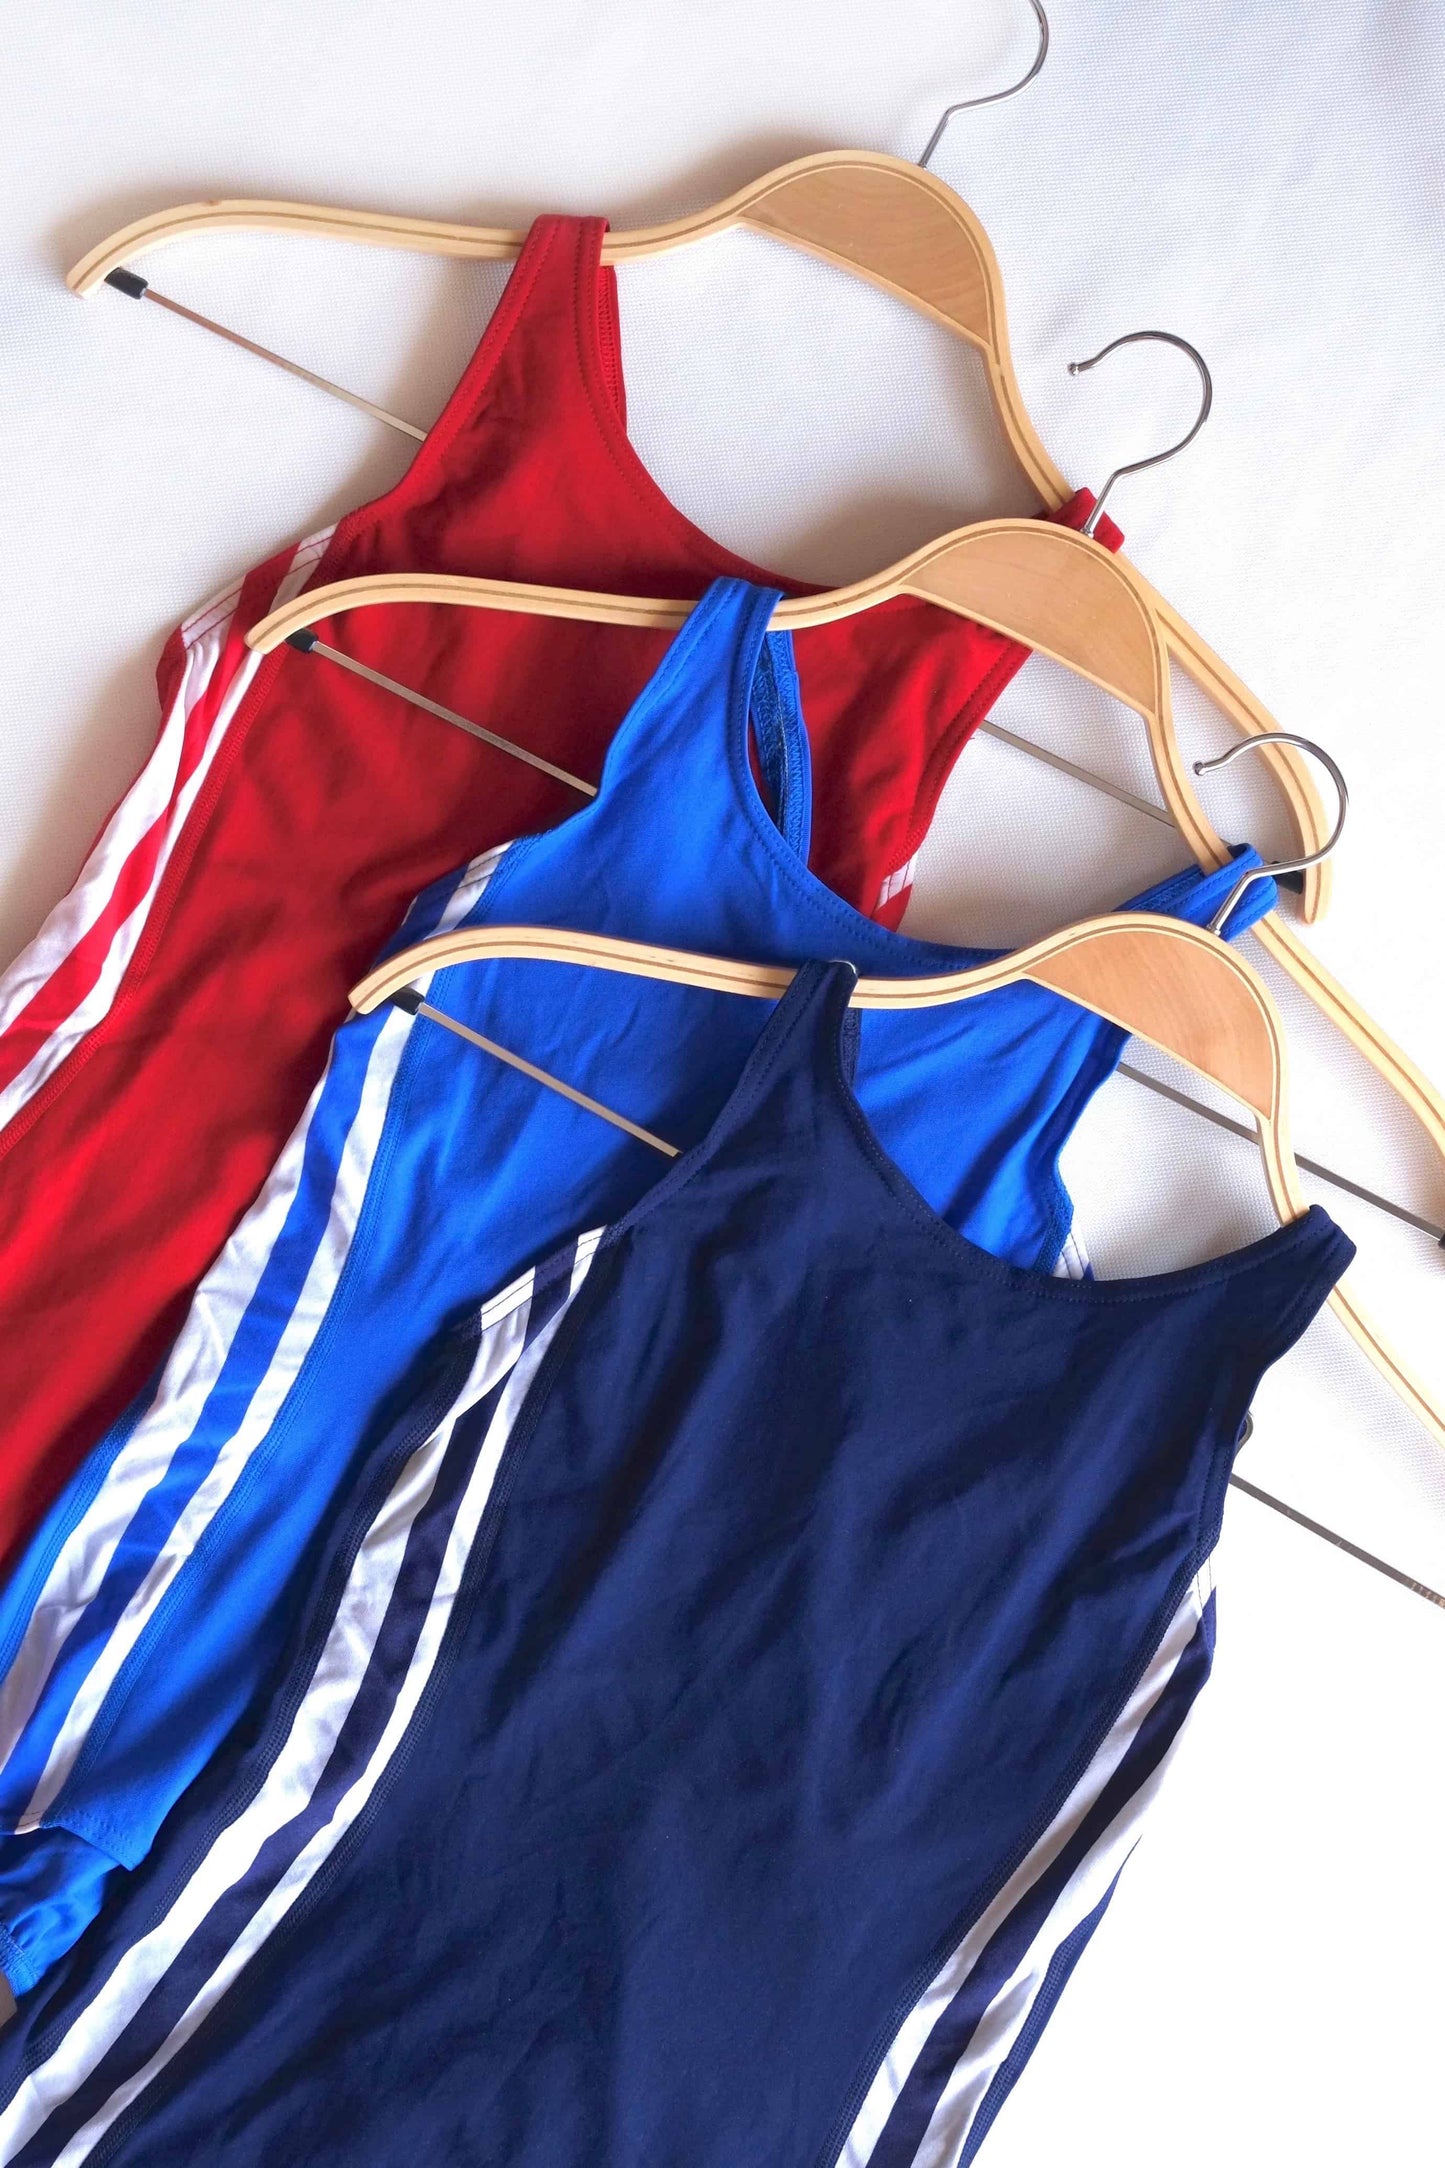 SOLAR 80's Classic Swimsuit 3 colors red, blue and navy